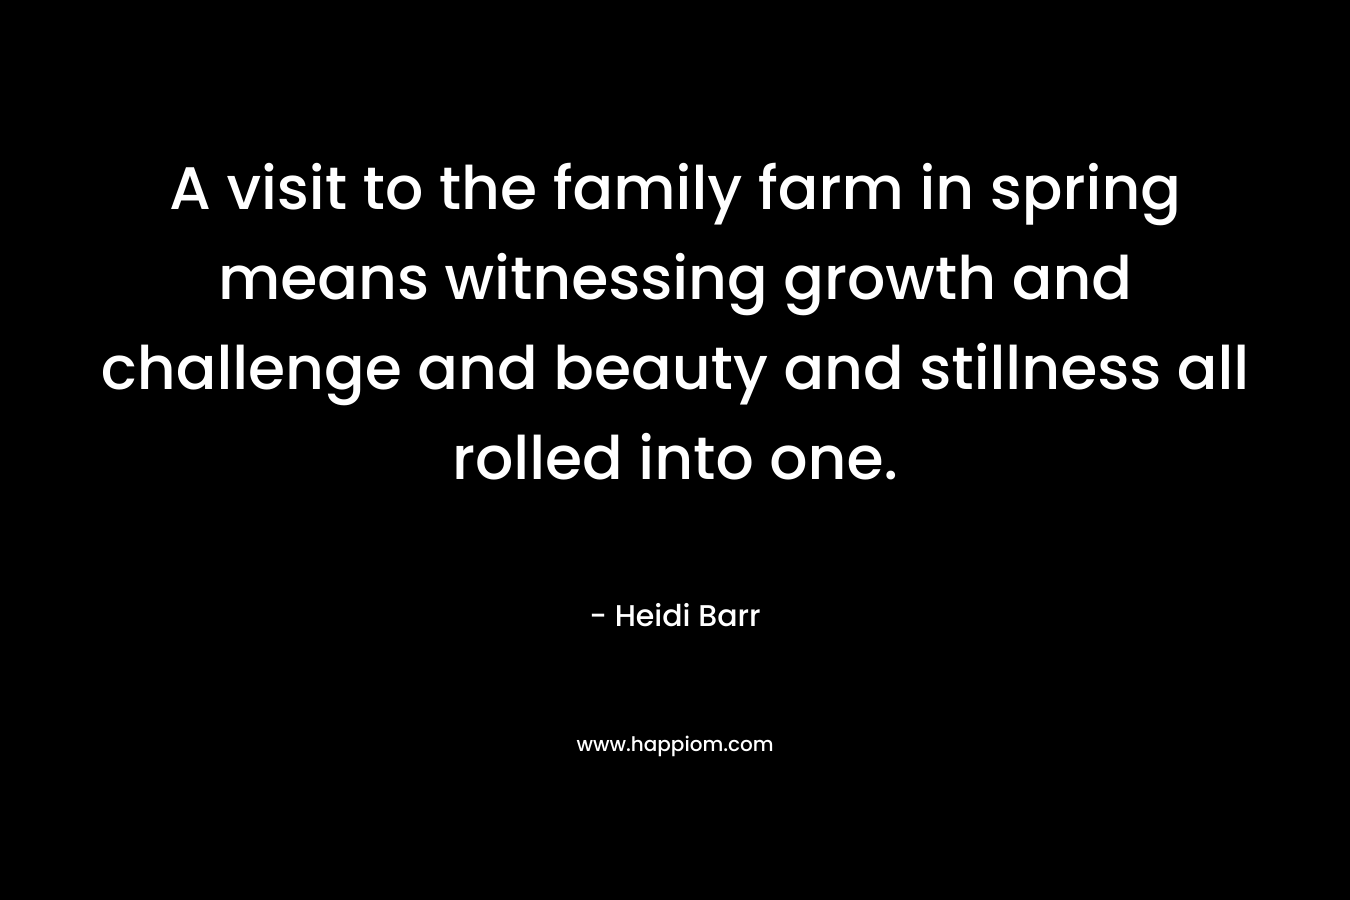 A visit to the family farm in spring means witnessing growth and challenge and beauty and stillness all rolled into one. – Heidi Barr